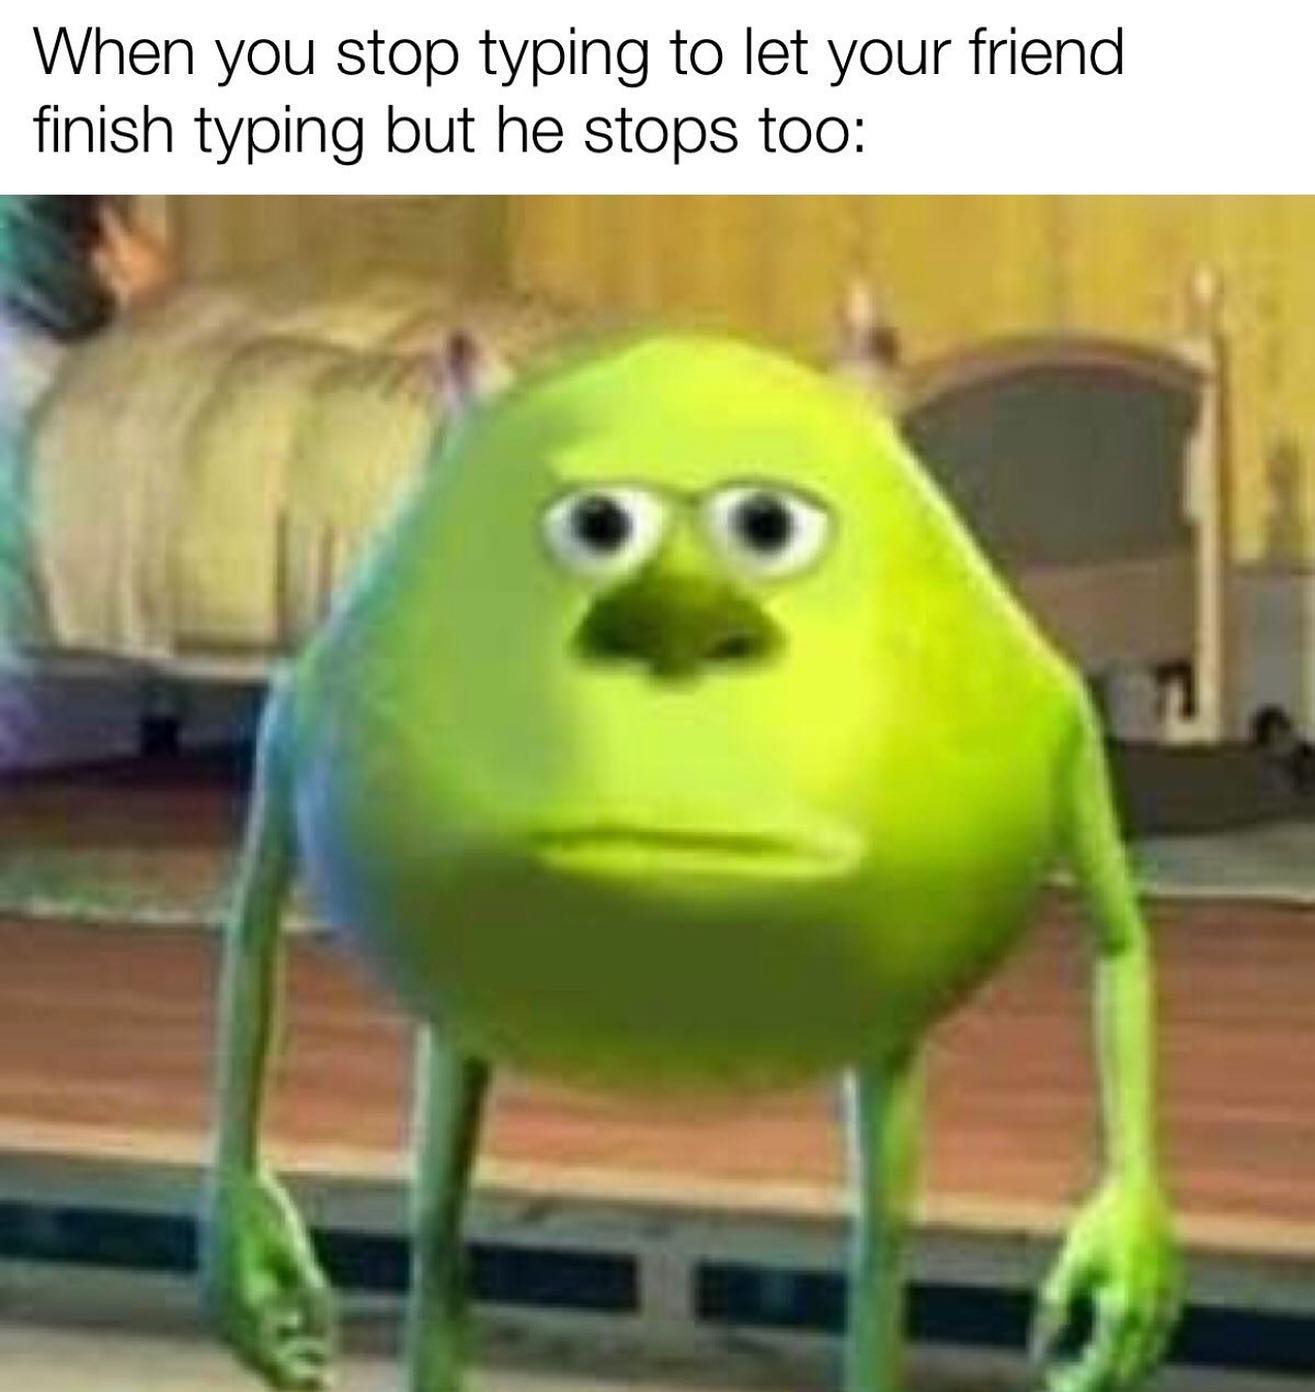 dank memes - mike wazowski meme - When you stop typing to let your friend finish typing but he stops too